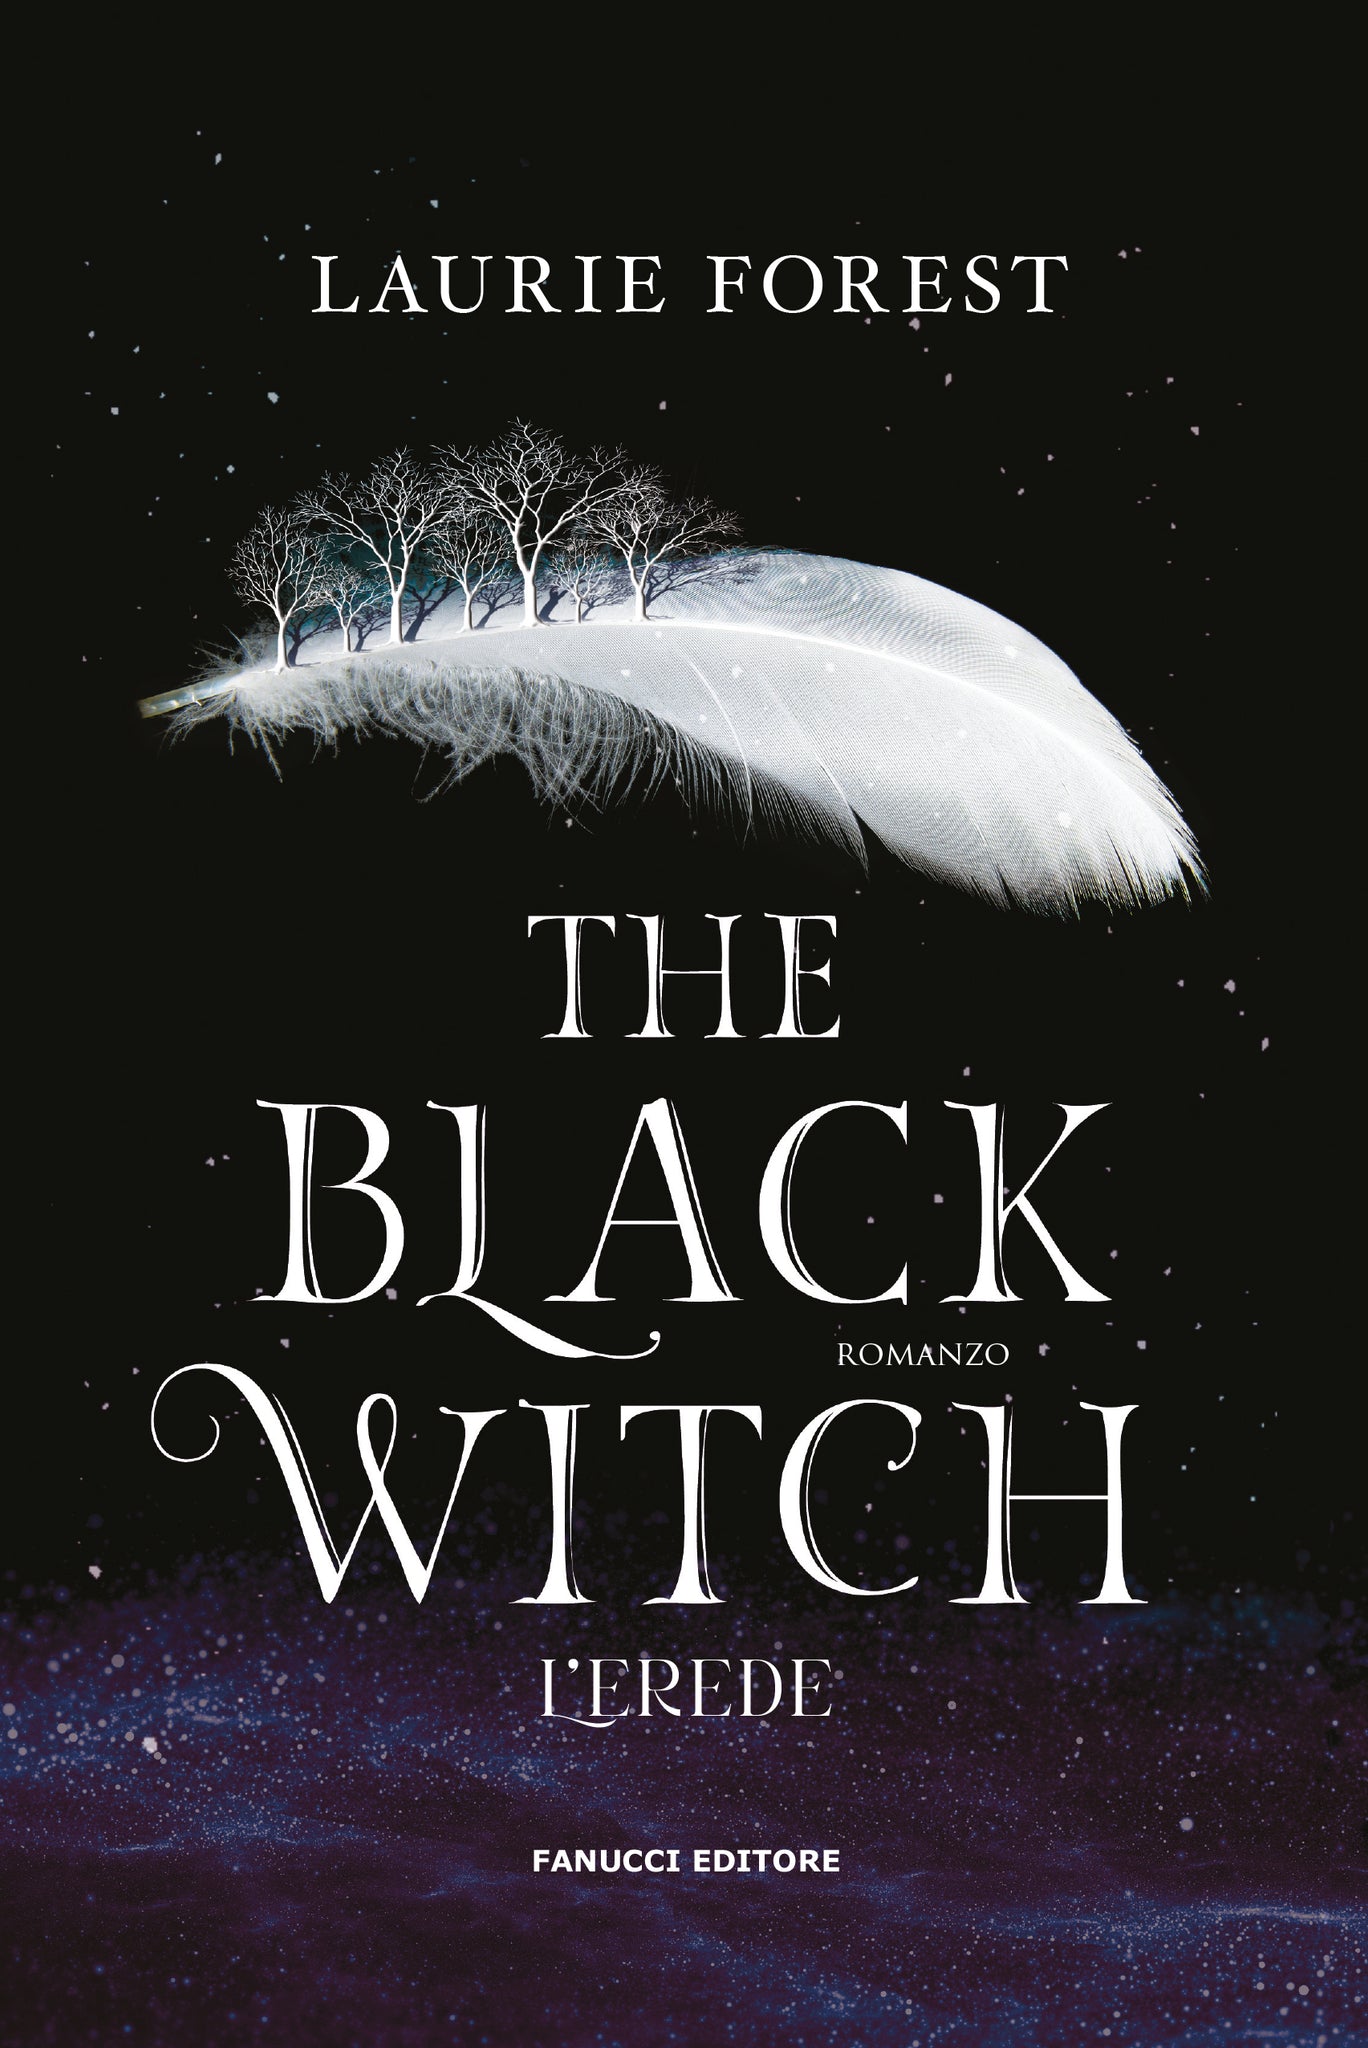 The Black Witch – L’erede